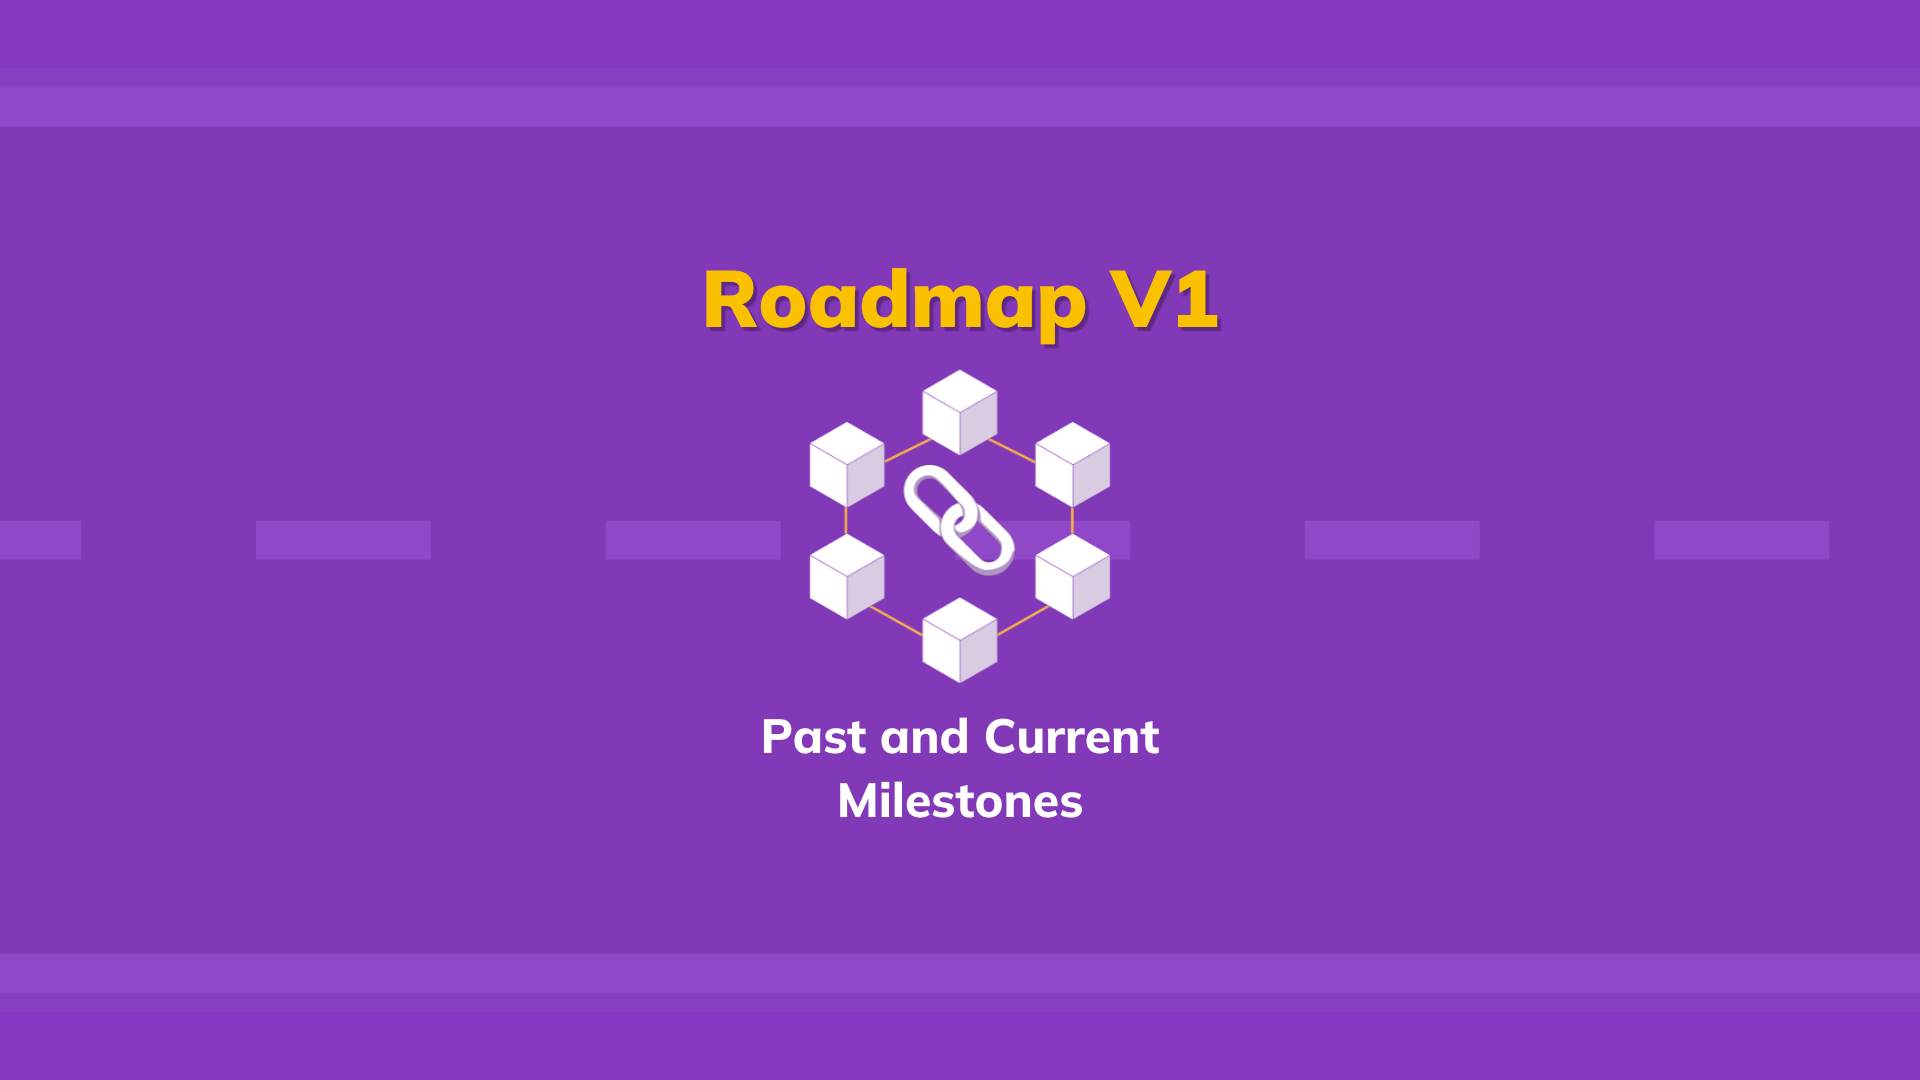 Pi Network’s Roadmap Version 1 is Here: A Transparent Look at Past and Current Milestones